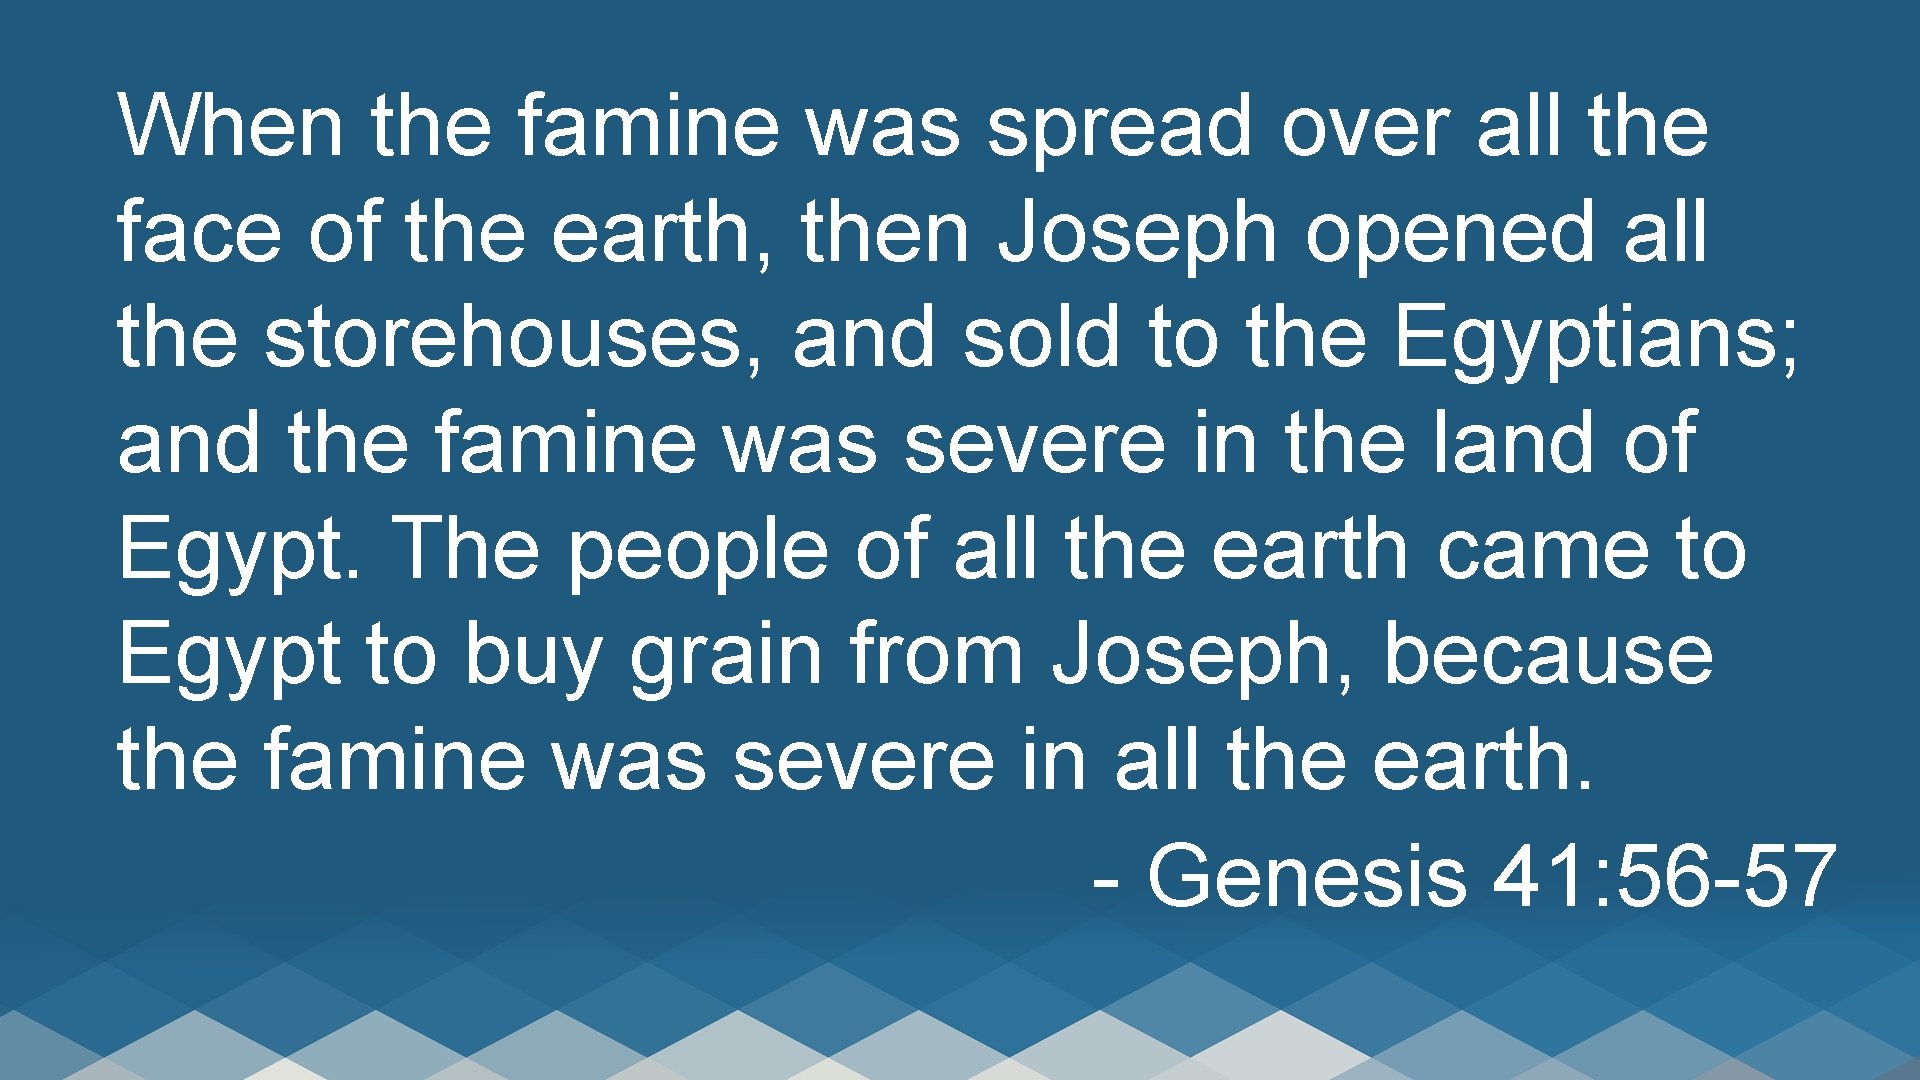 When the famine was spread over all the face of the earth, then Joseph